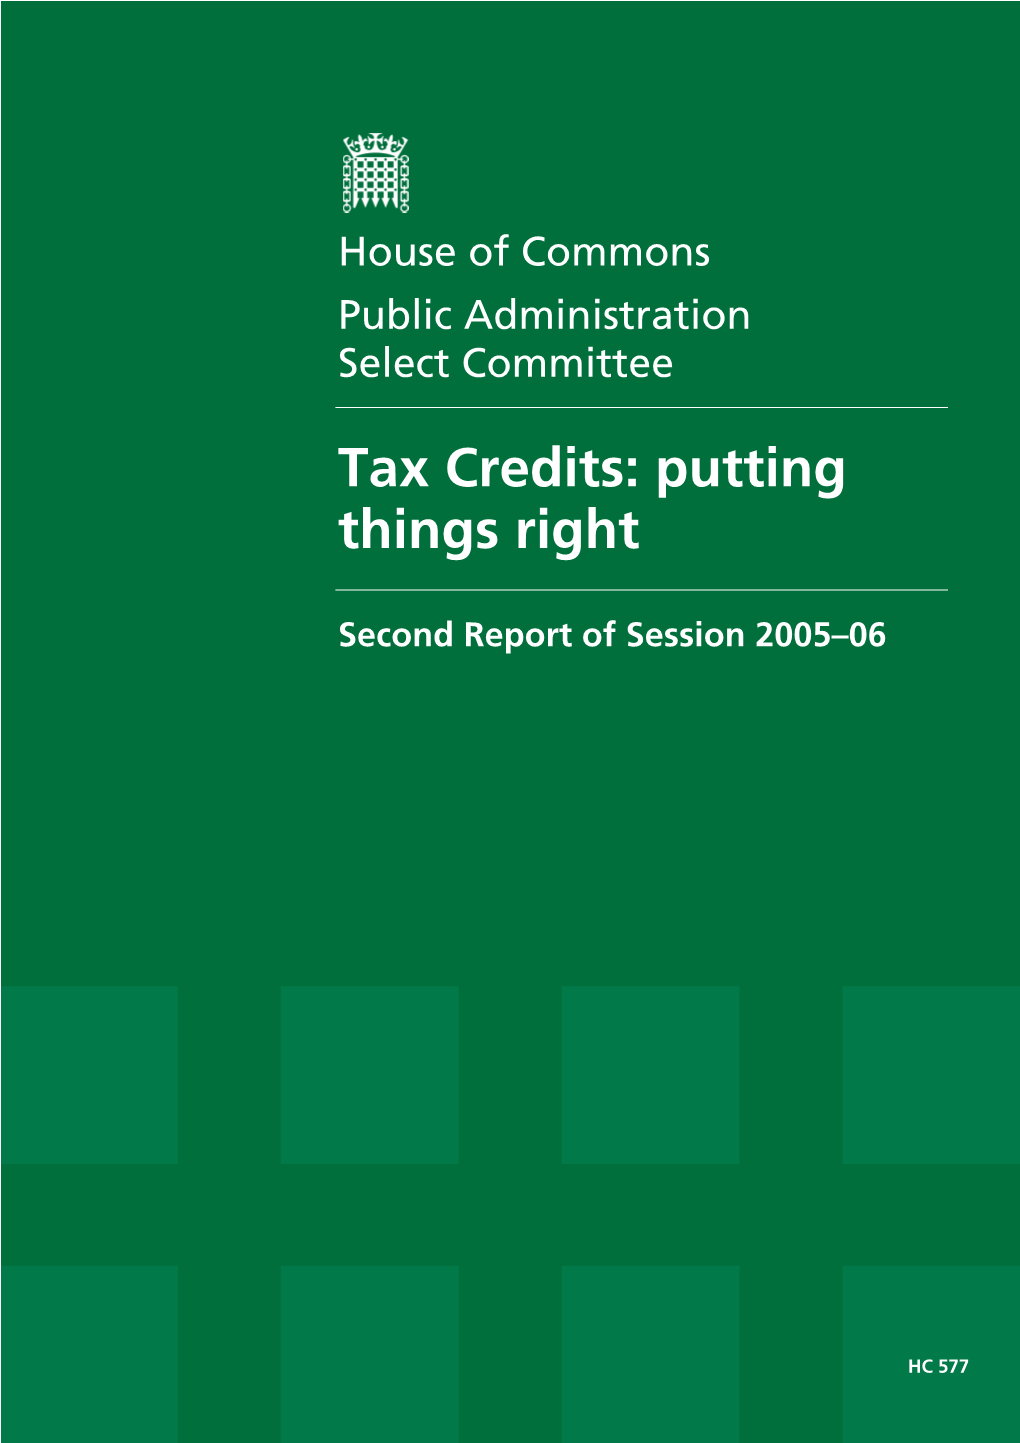 Tax Credits: Putting Things Right